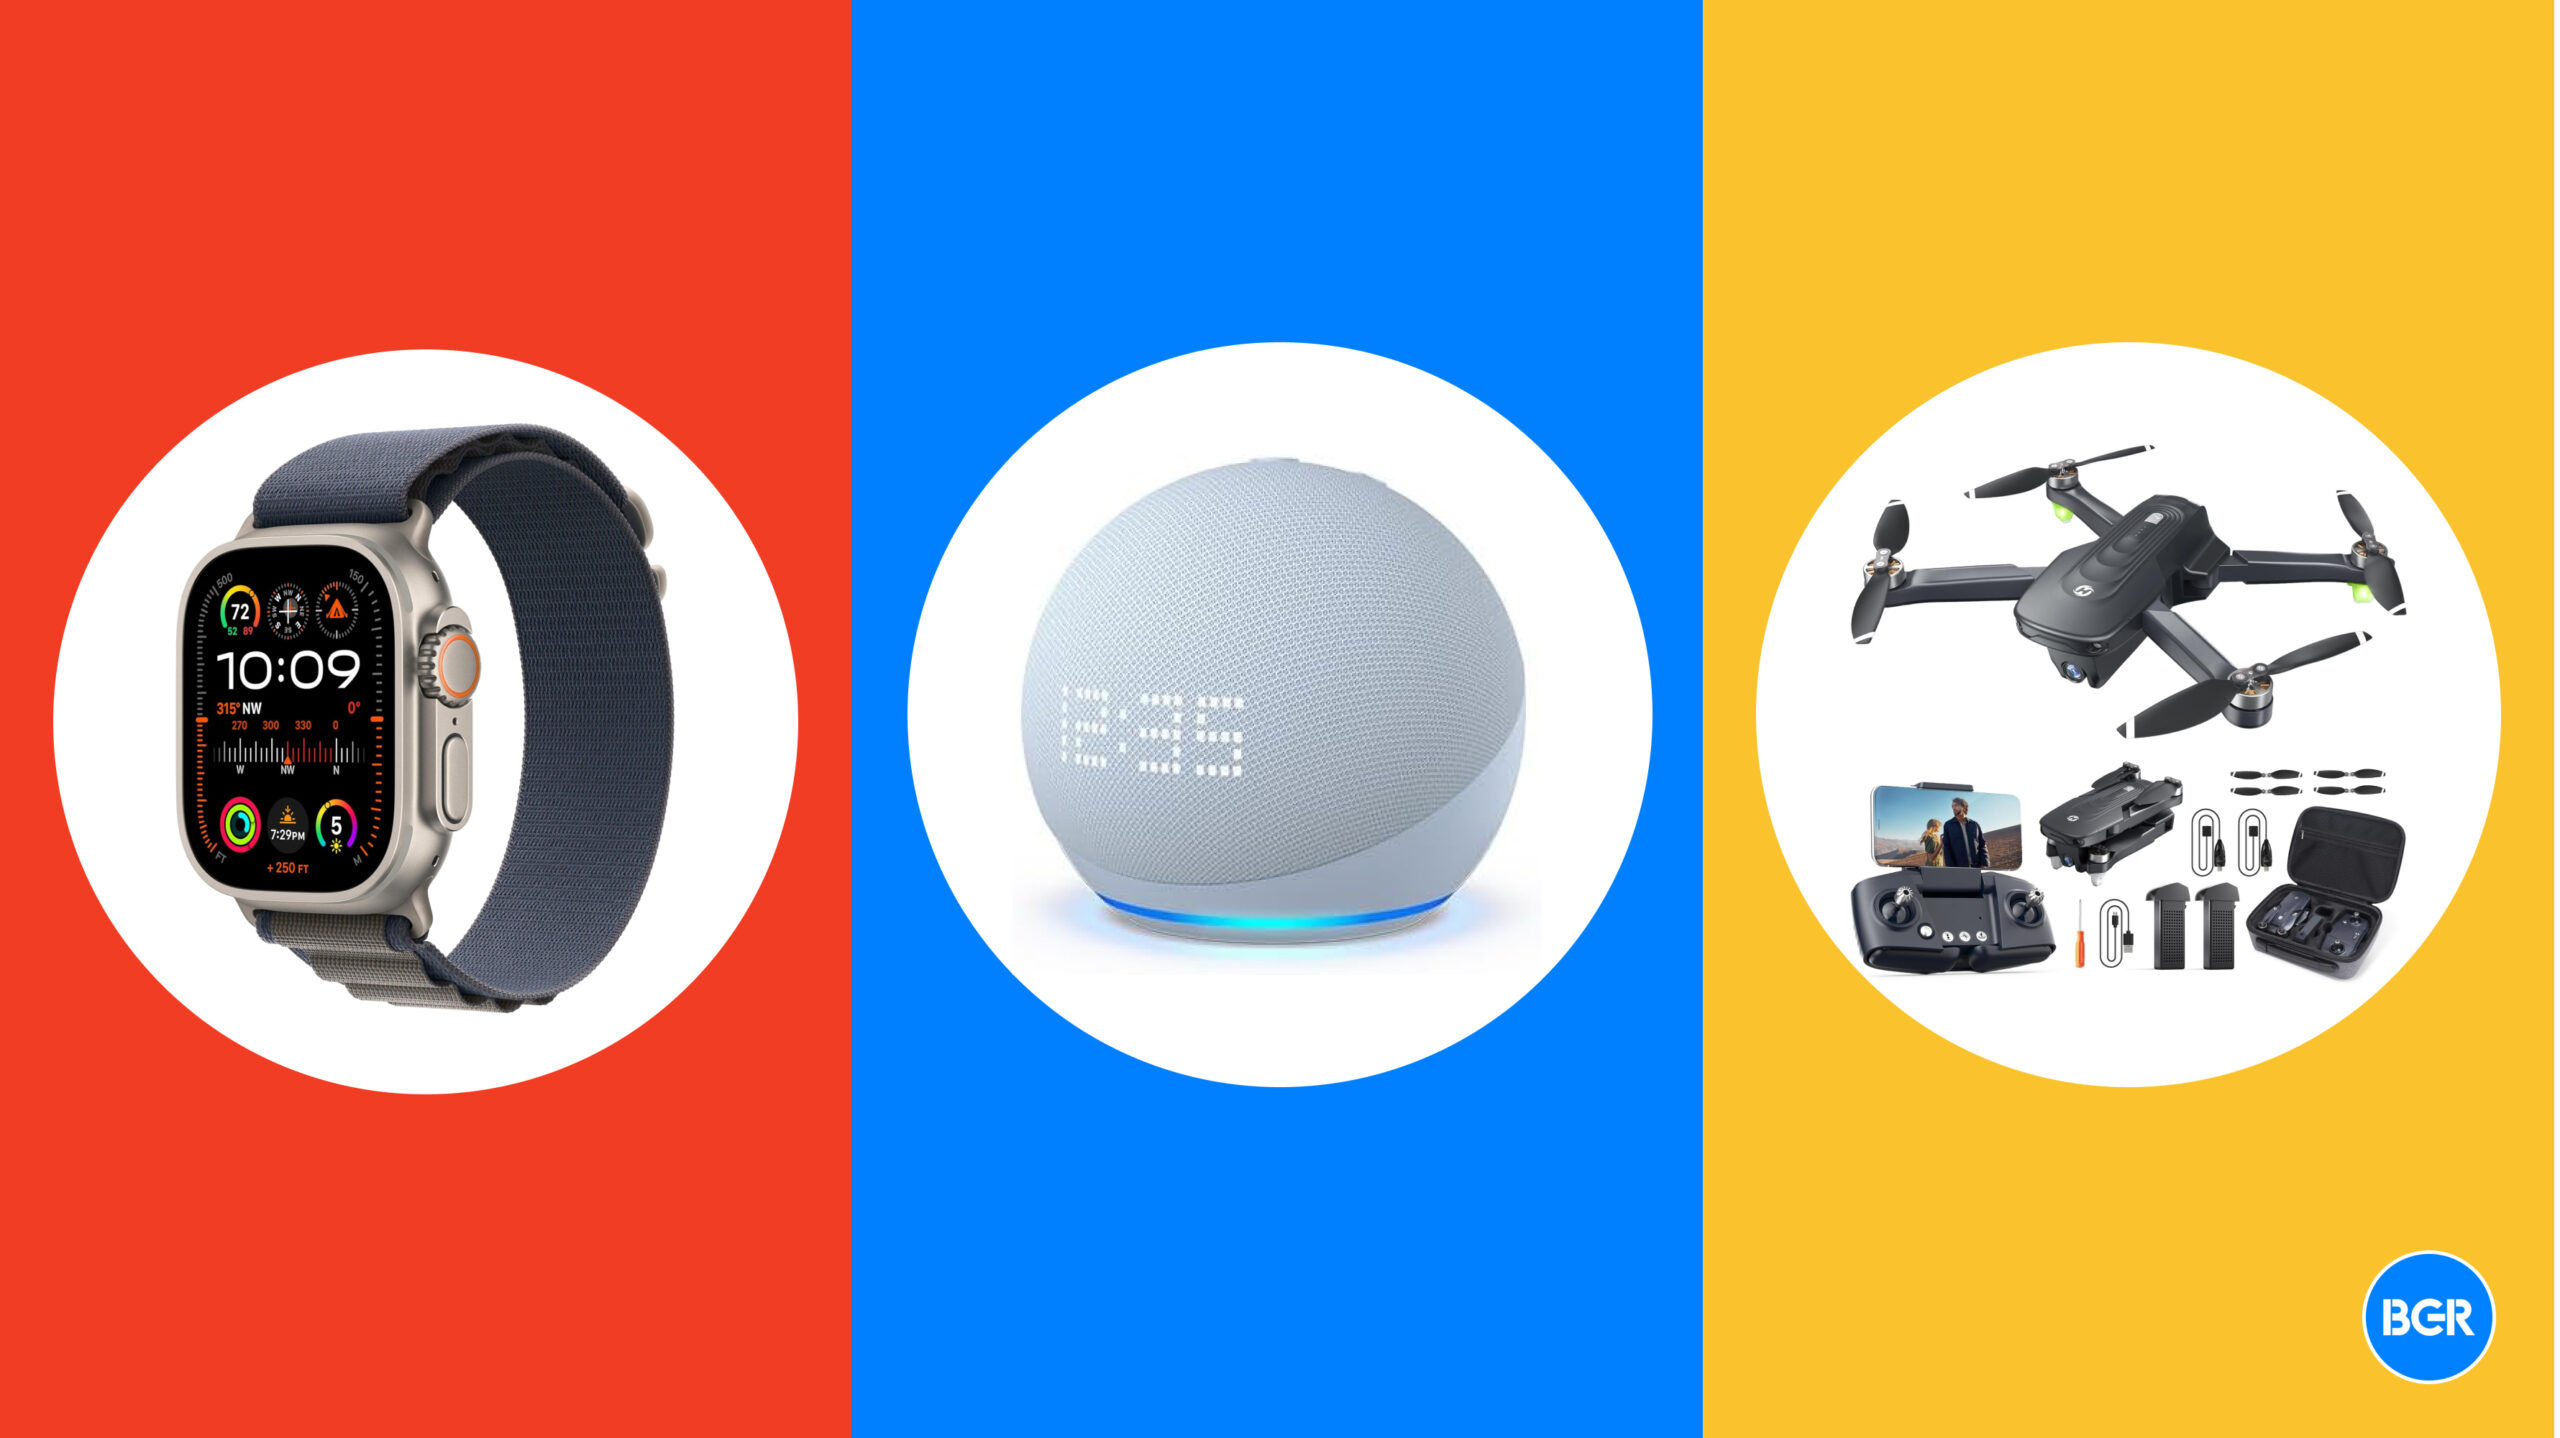 Today’s deals: $179 Apple Watch SE, free Amazon Echo Pop, $20 AirTags, $21 Sonicare toothbrush, more